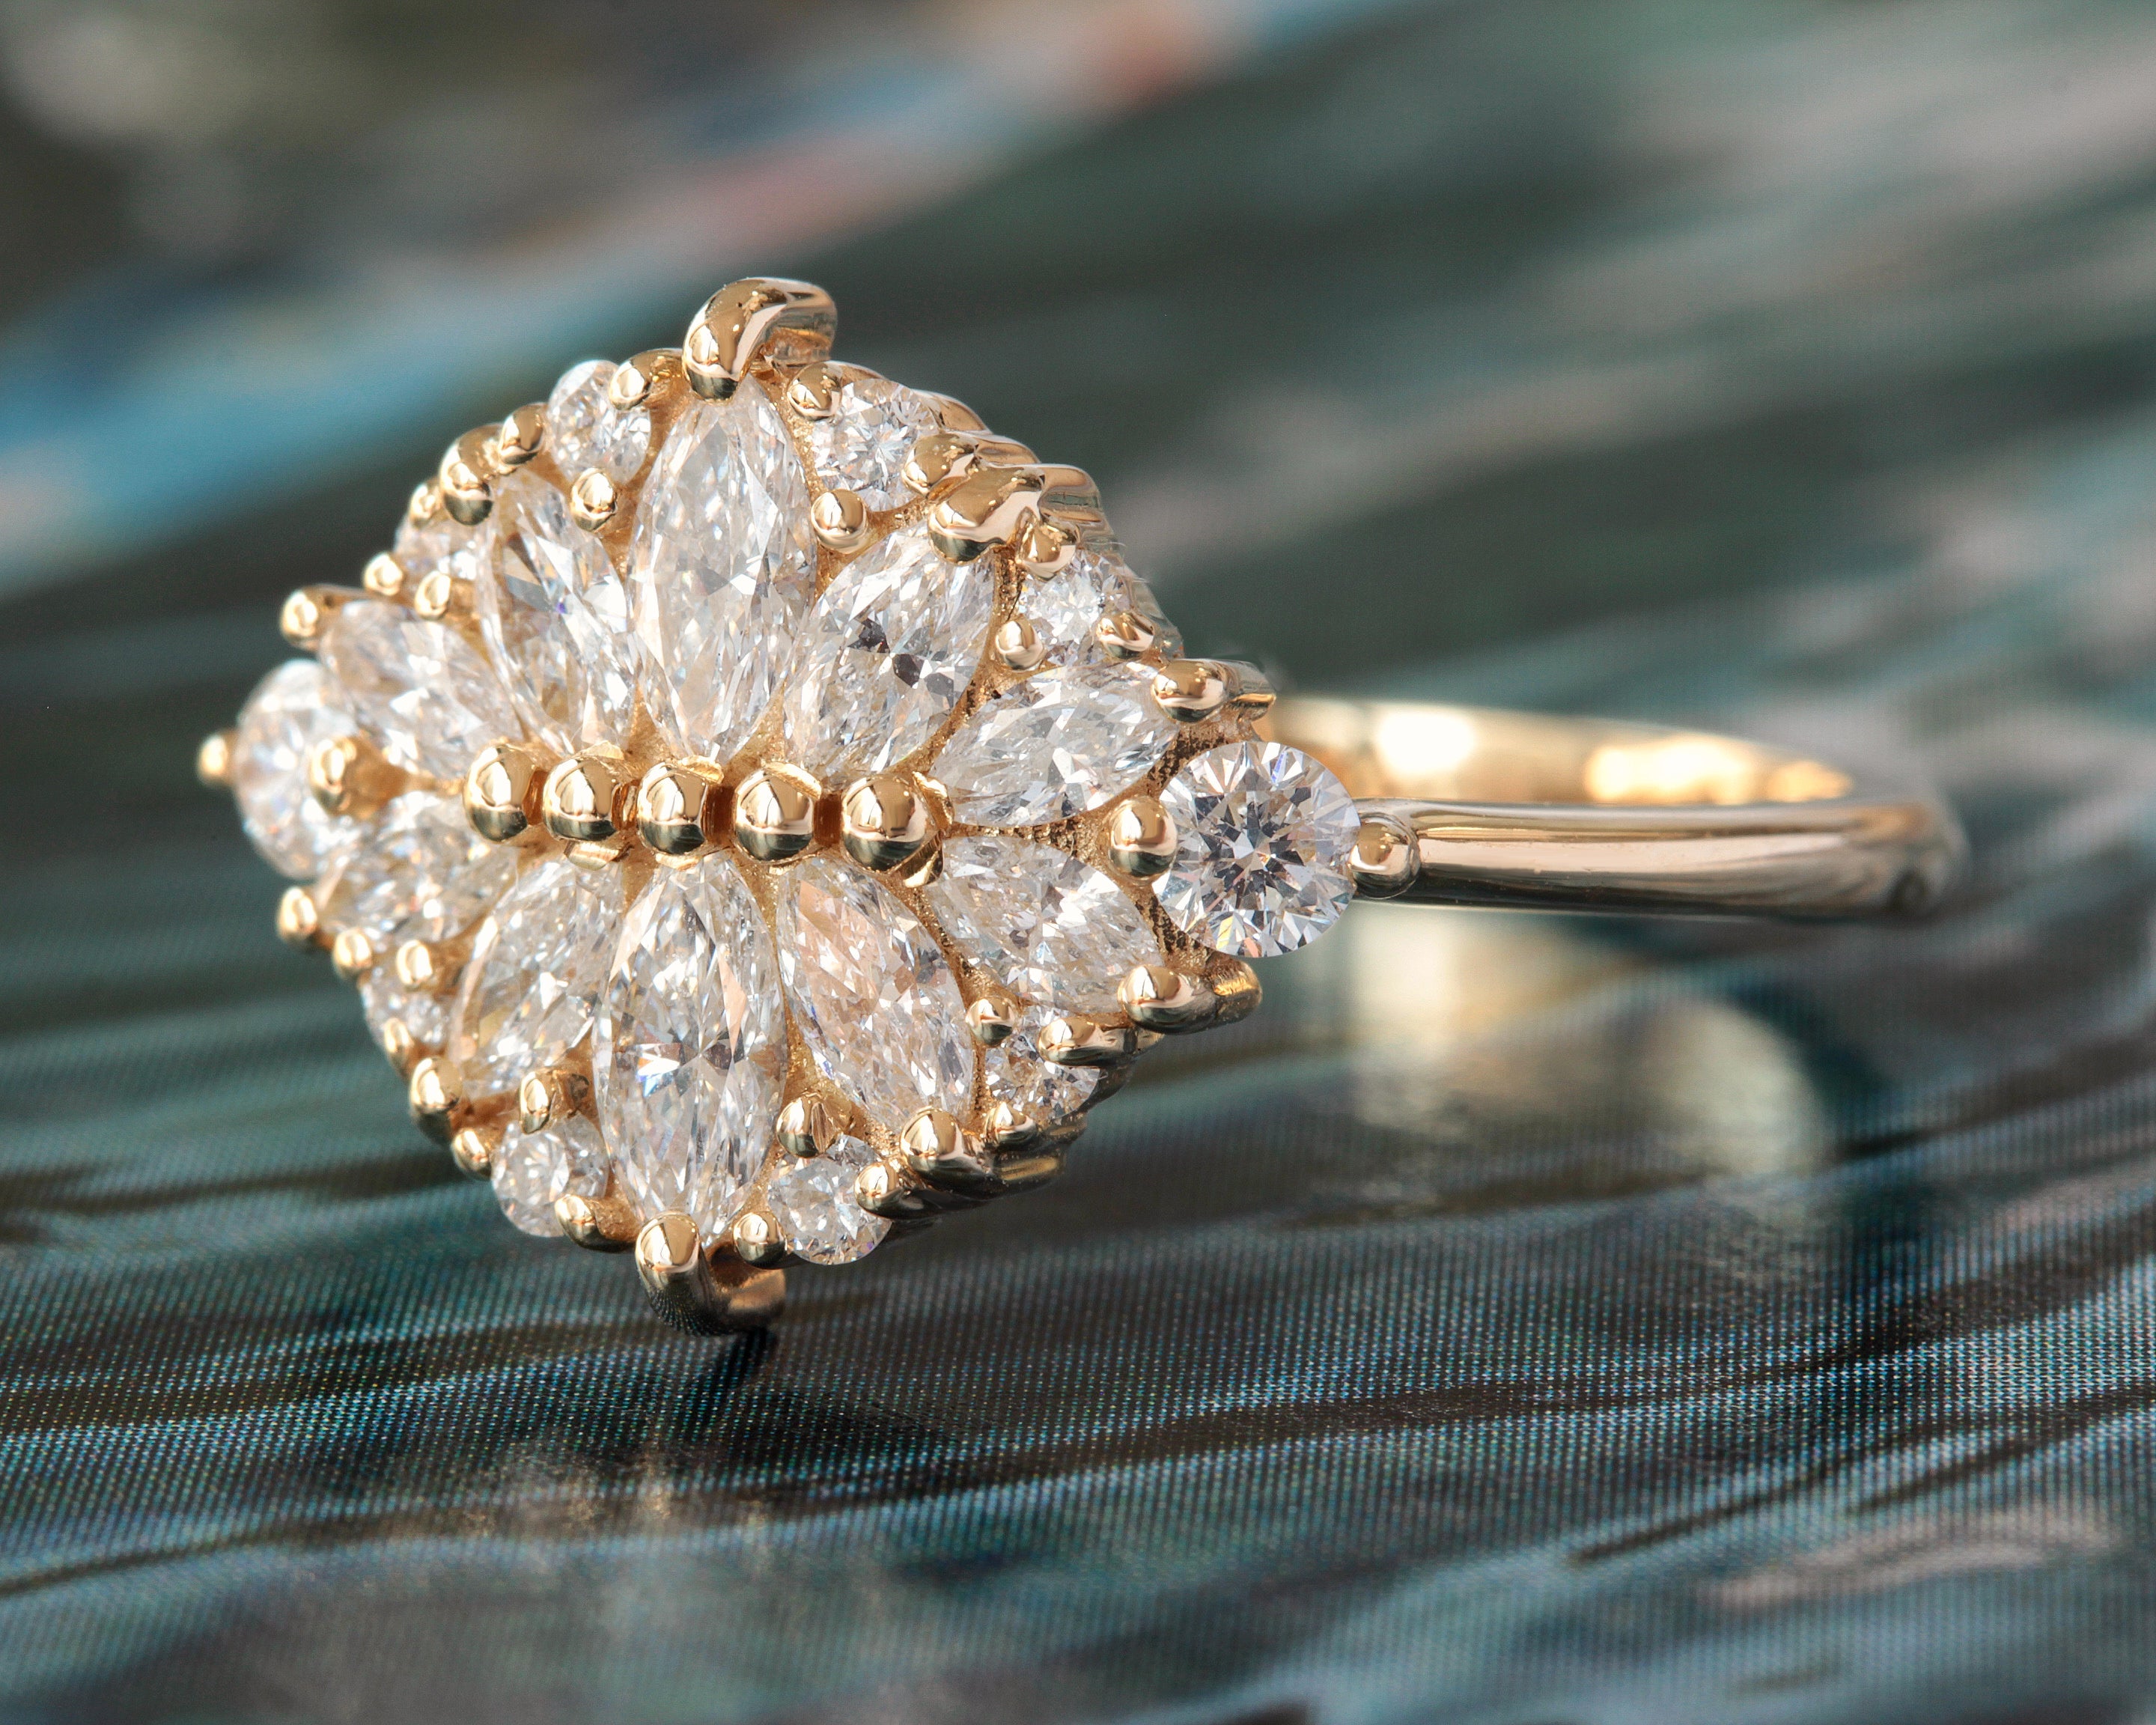 Cluster Marquise Diamond Alternative Engagement Ring - Reflections, 14K Yellow Gold, READY TO SHIP! ♥